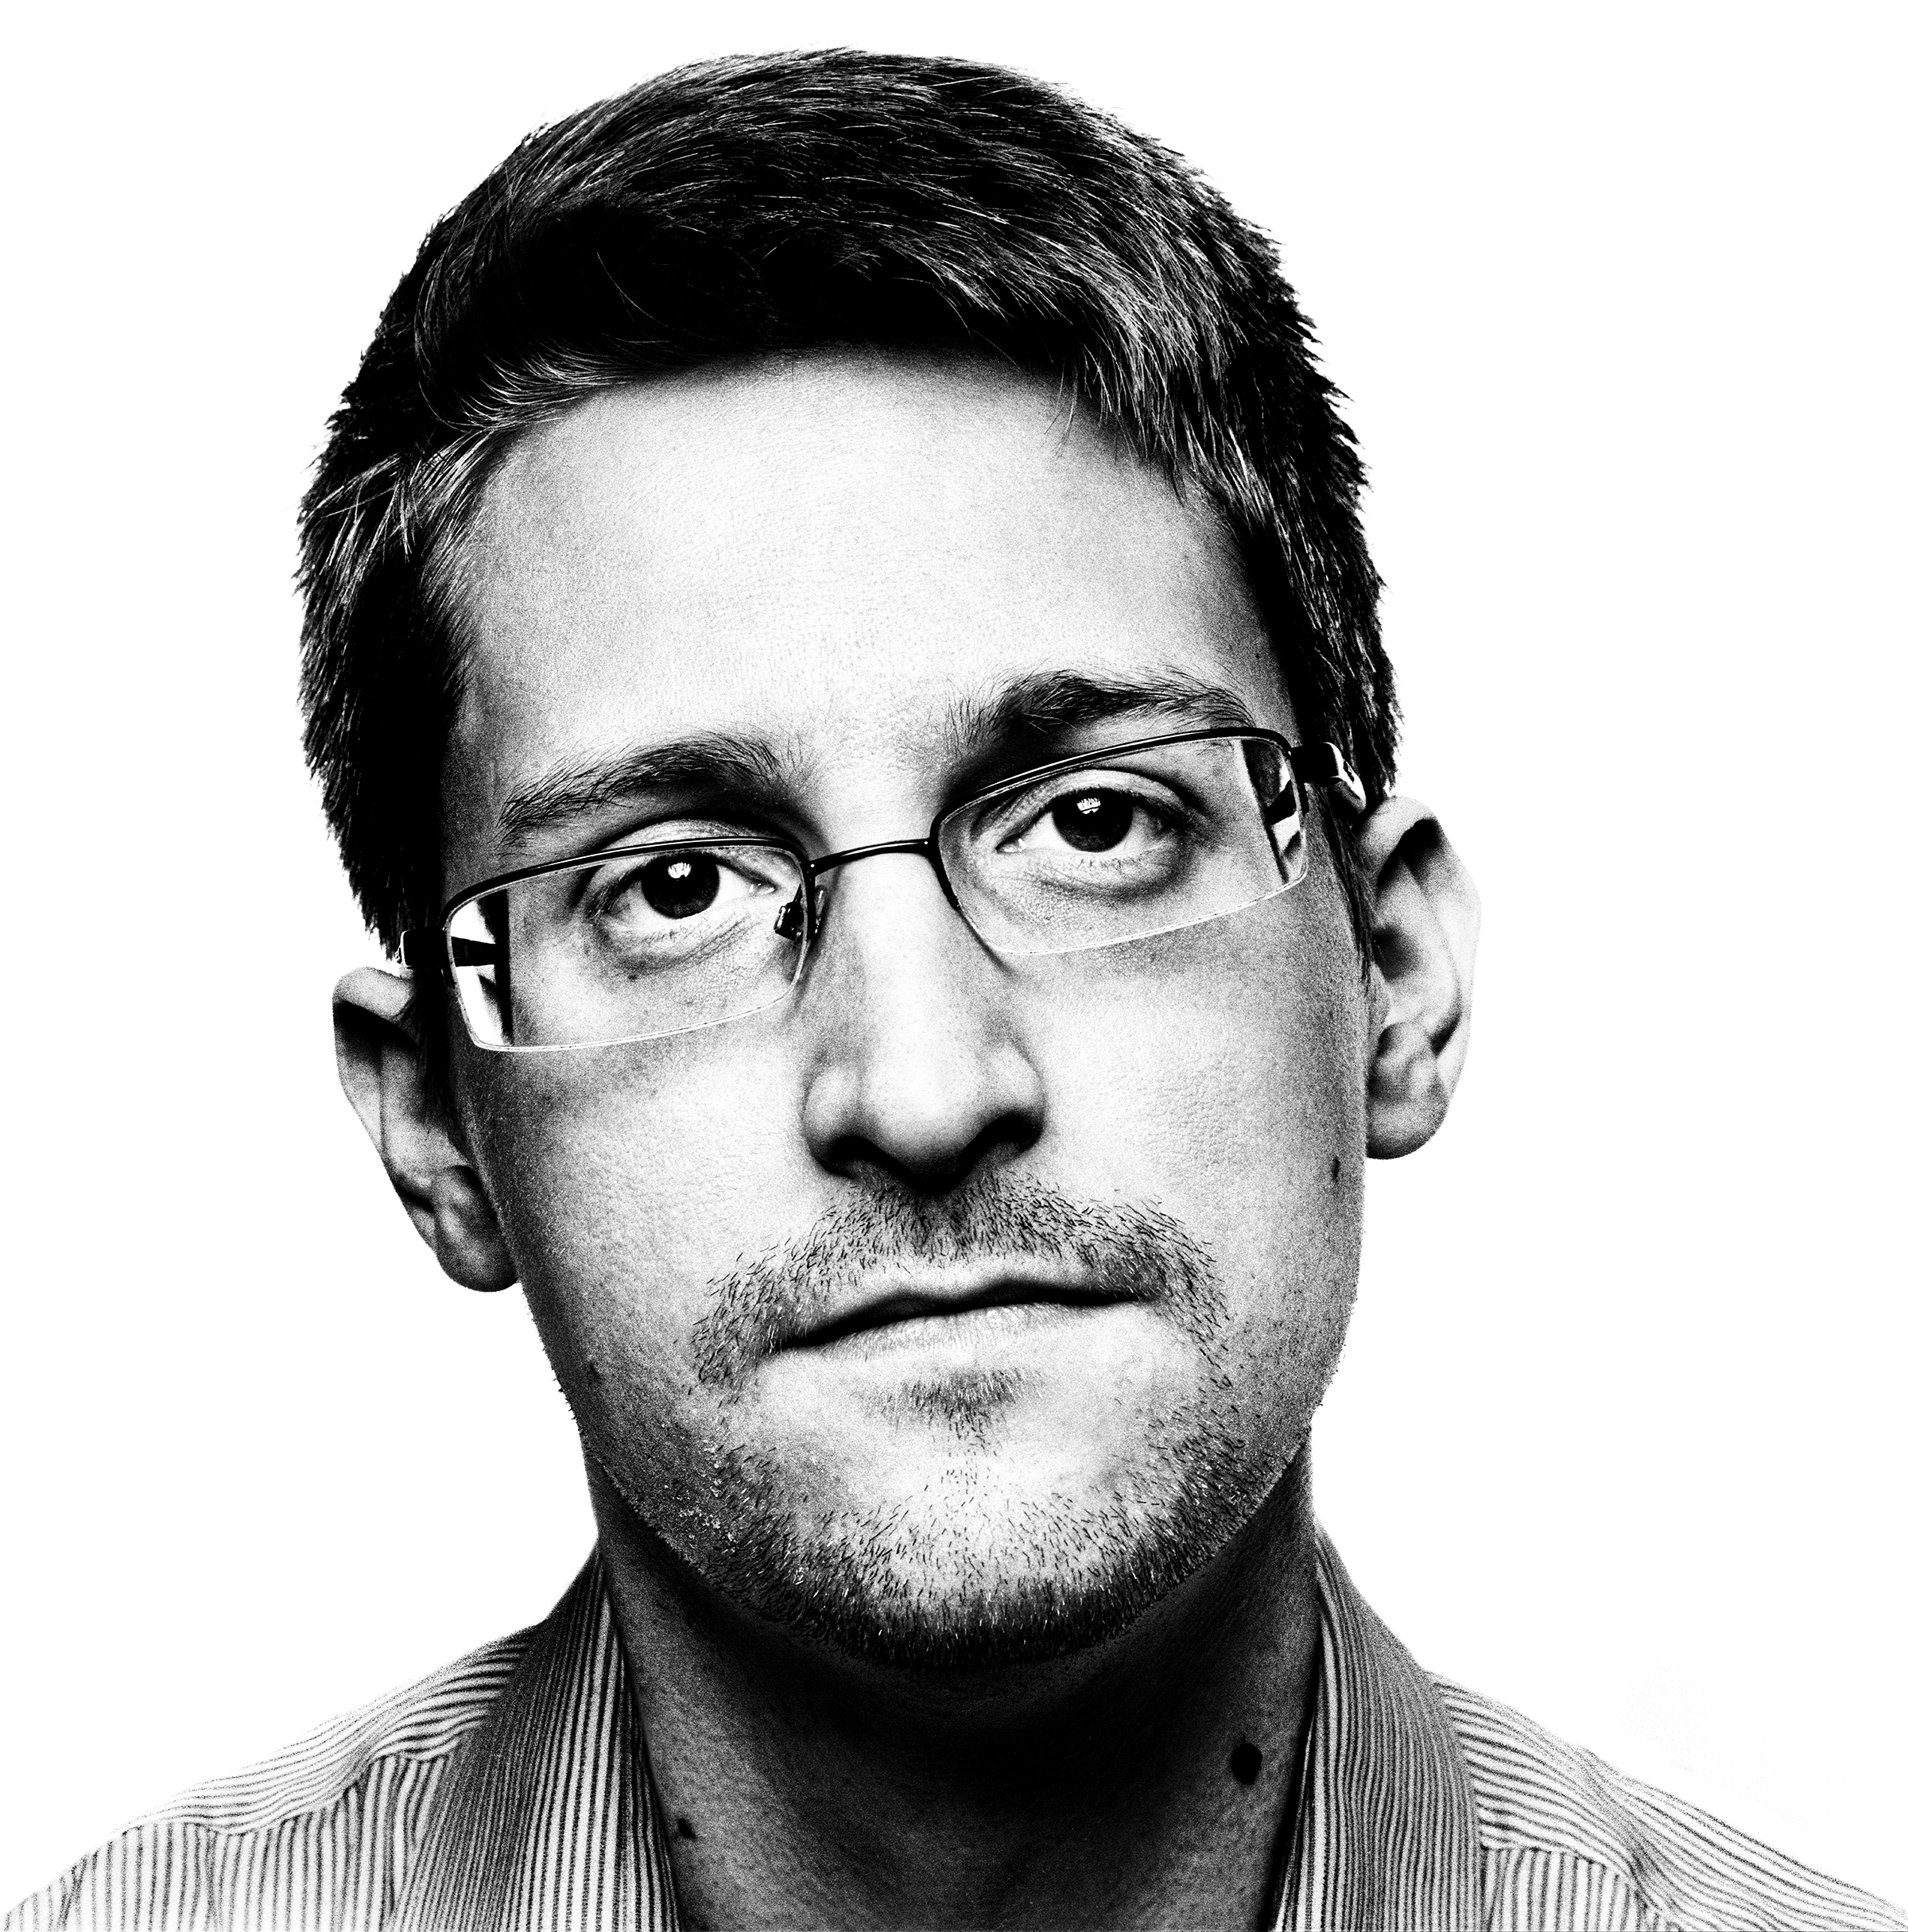 Edward Snowden (Supporting Image 2)